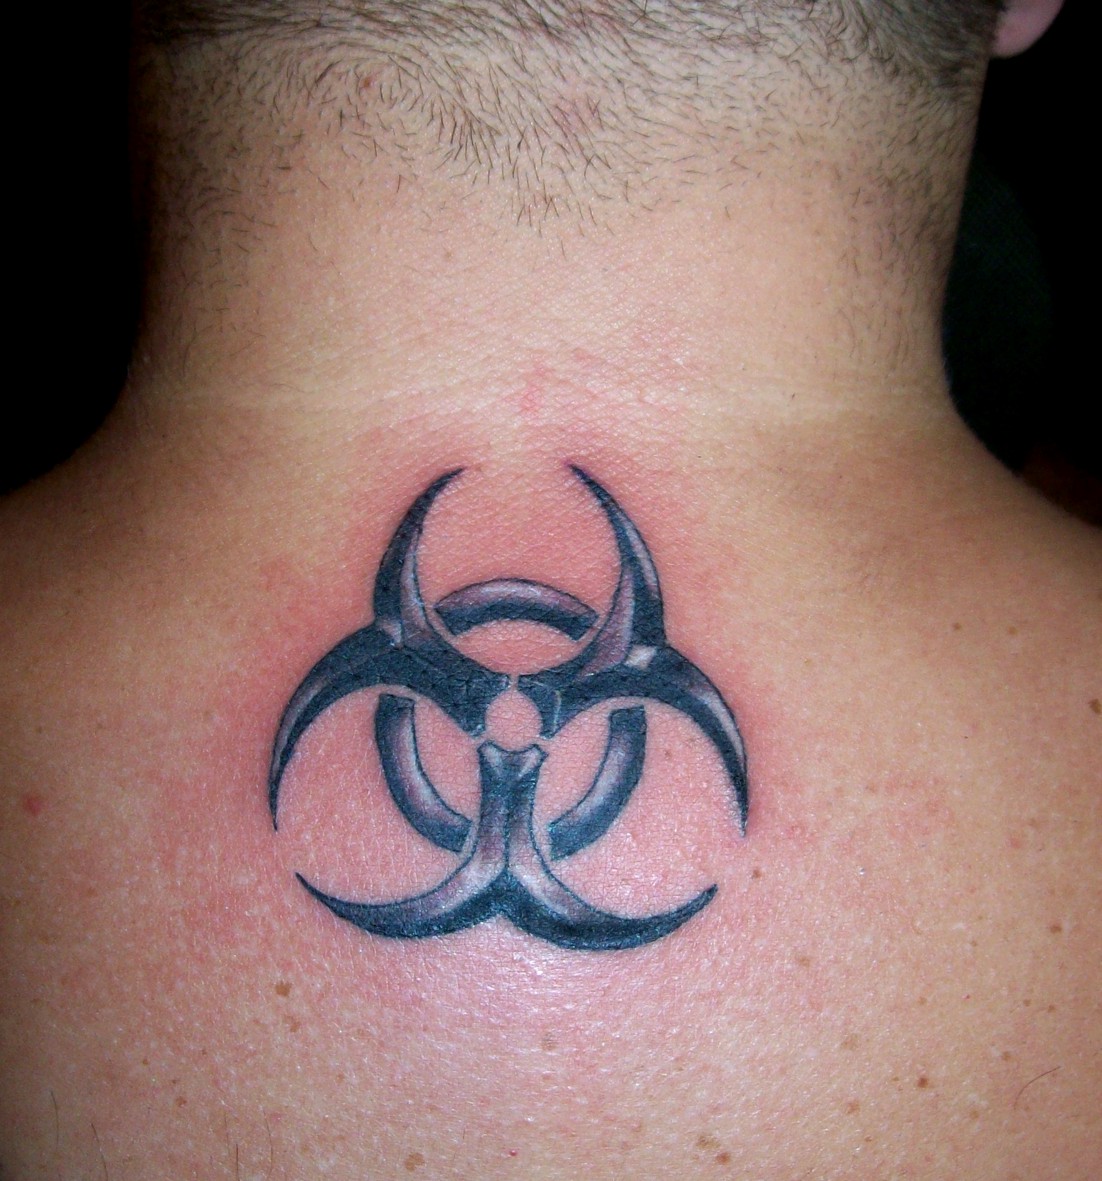 Biohazard Tattoos Designs, Ideas and Meaning | Tattoos For You